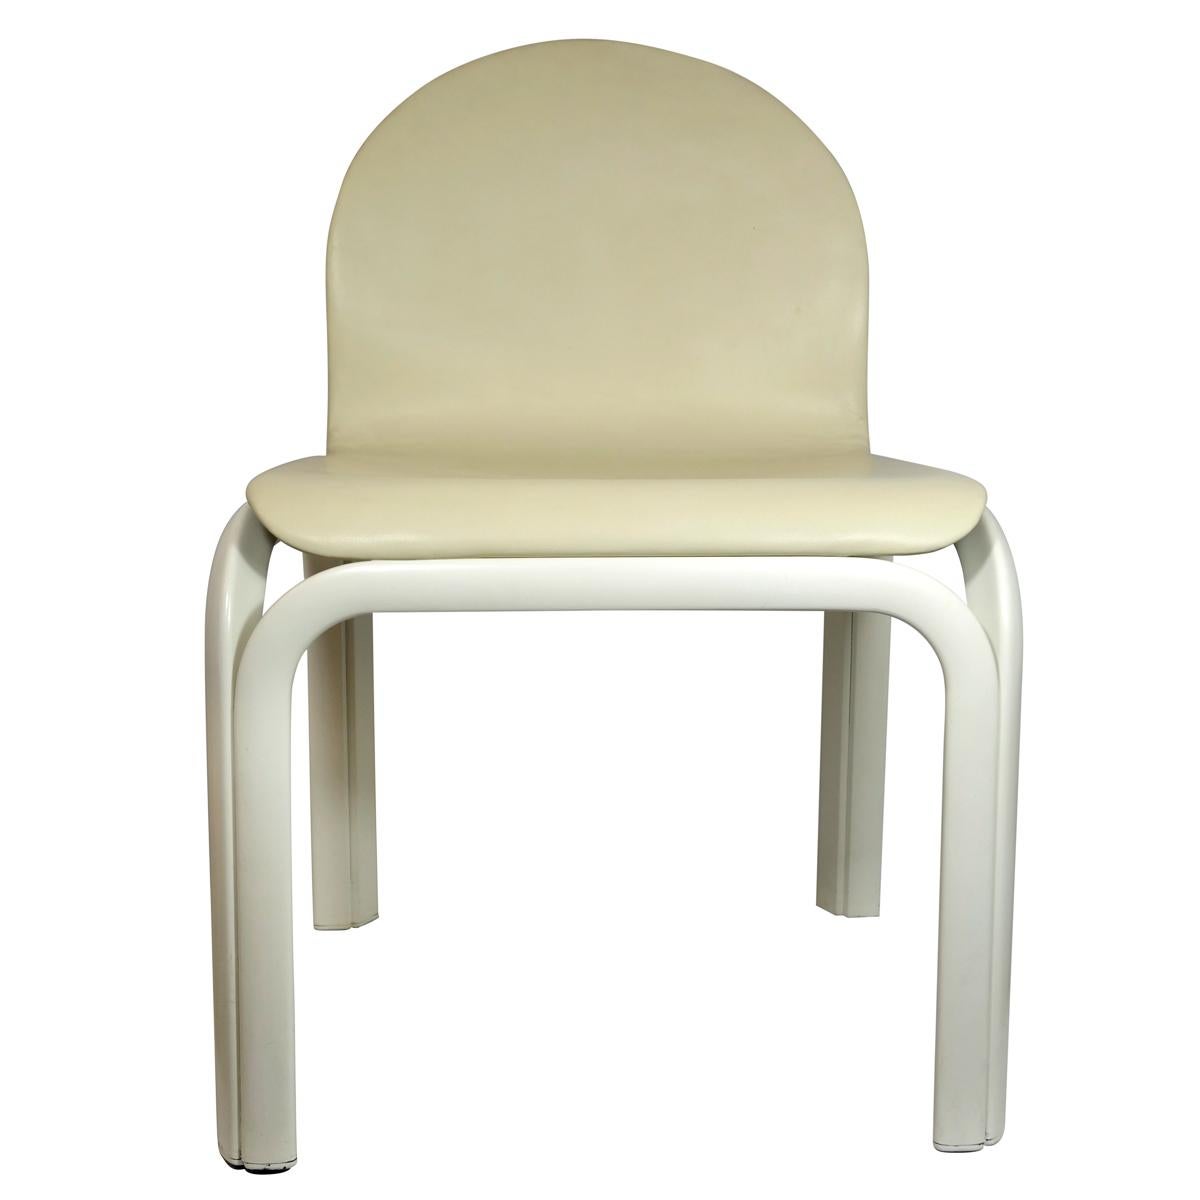 Set of 4 white lacquered aluminum dining chairs named Orsay. They were designed by Gae Aulenti for Knoll International.
The chairs have been reupholstered with fine beige leather.
Two chairs have armrest, the other two do not.